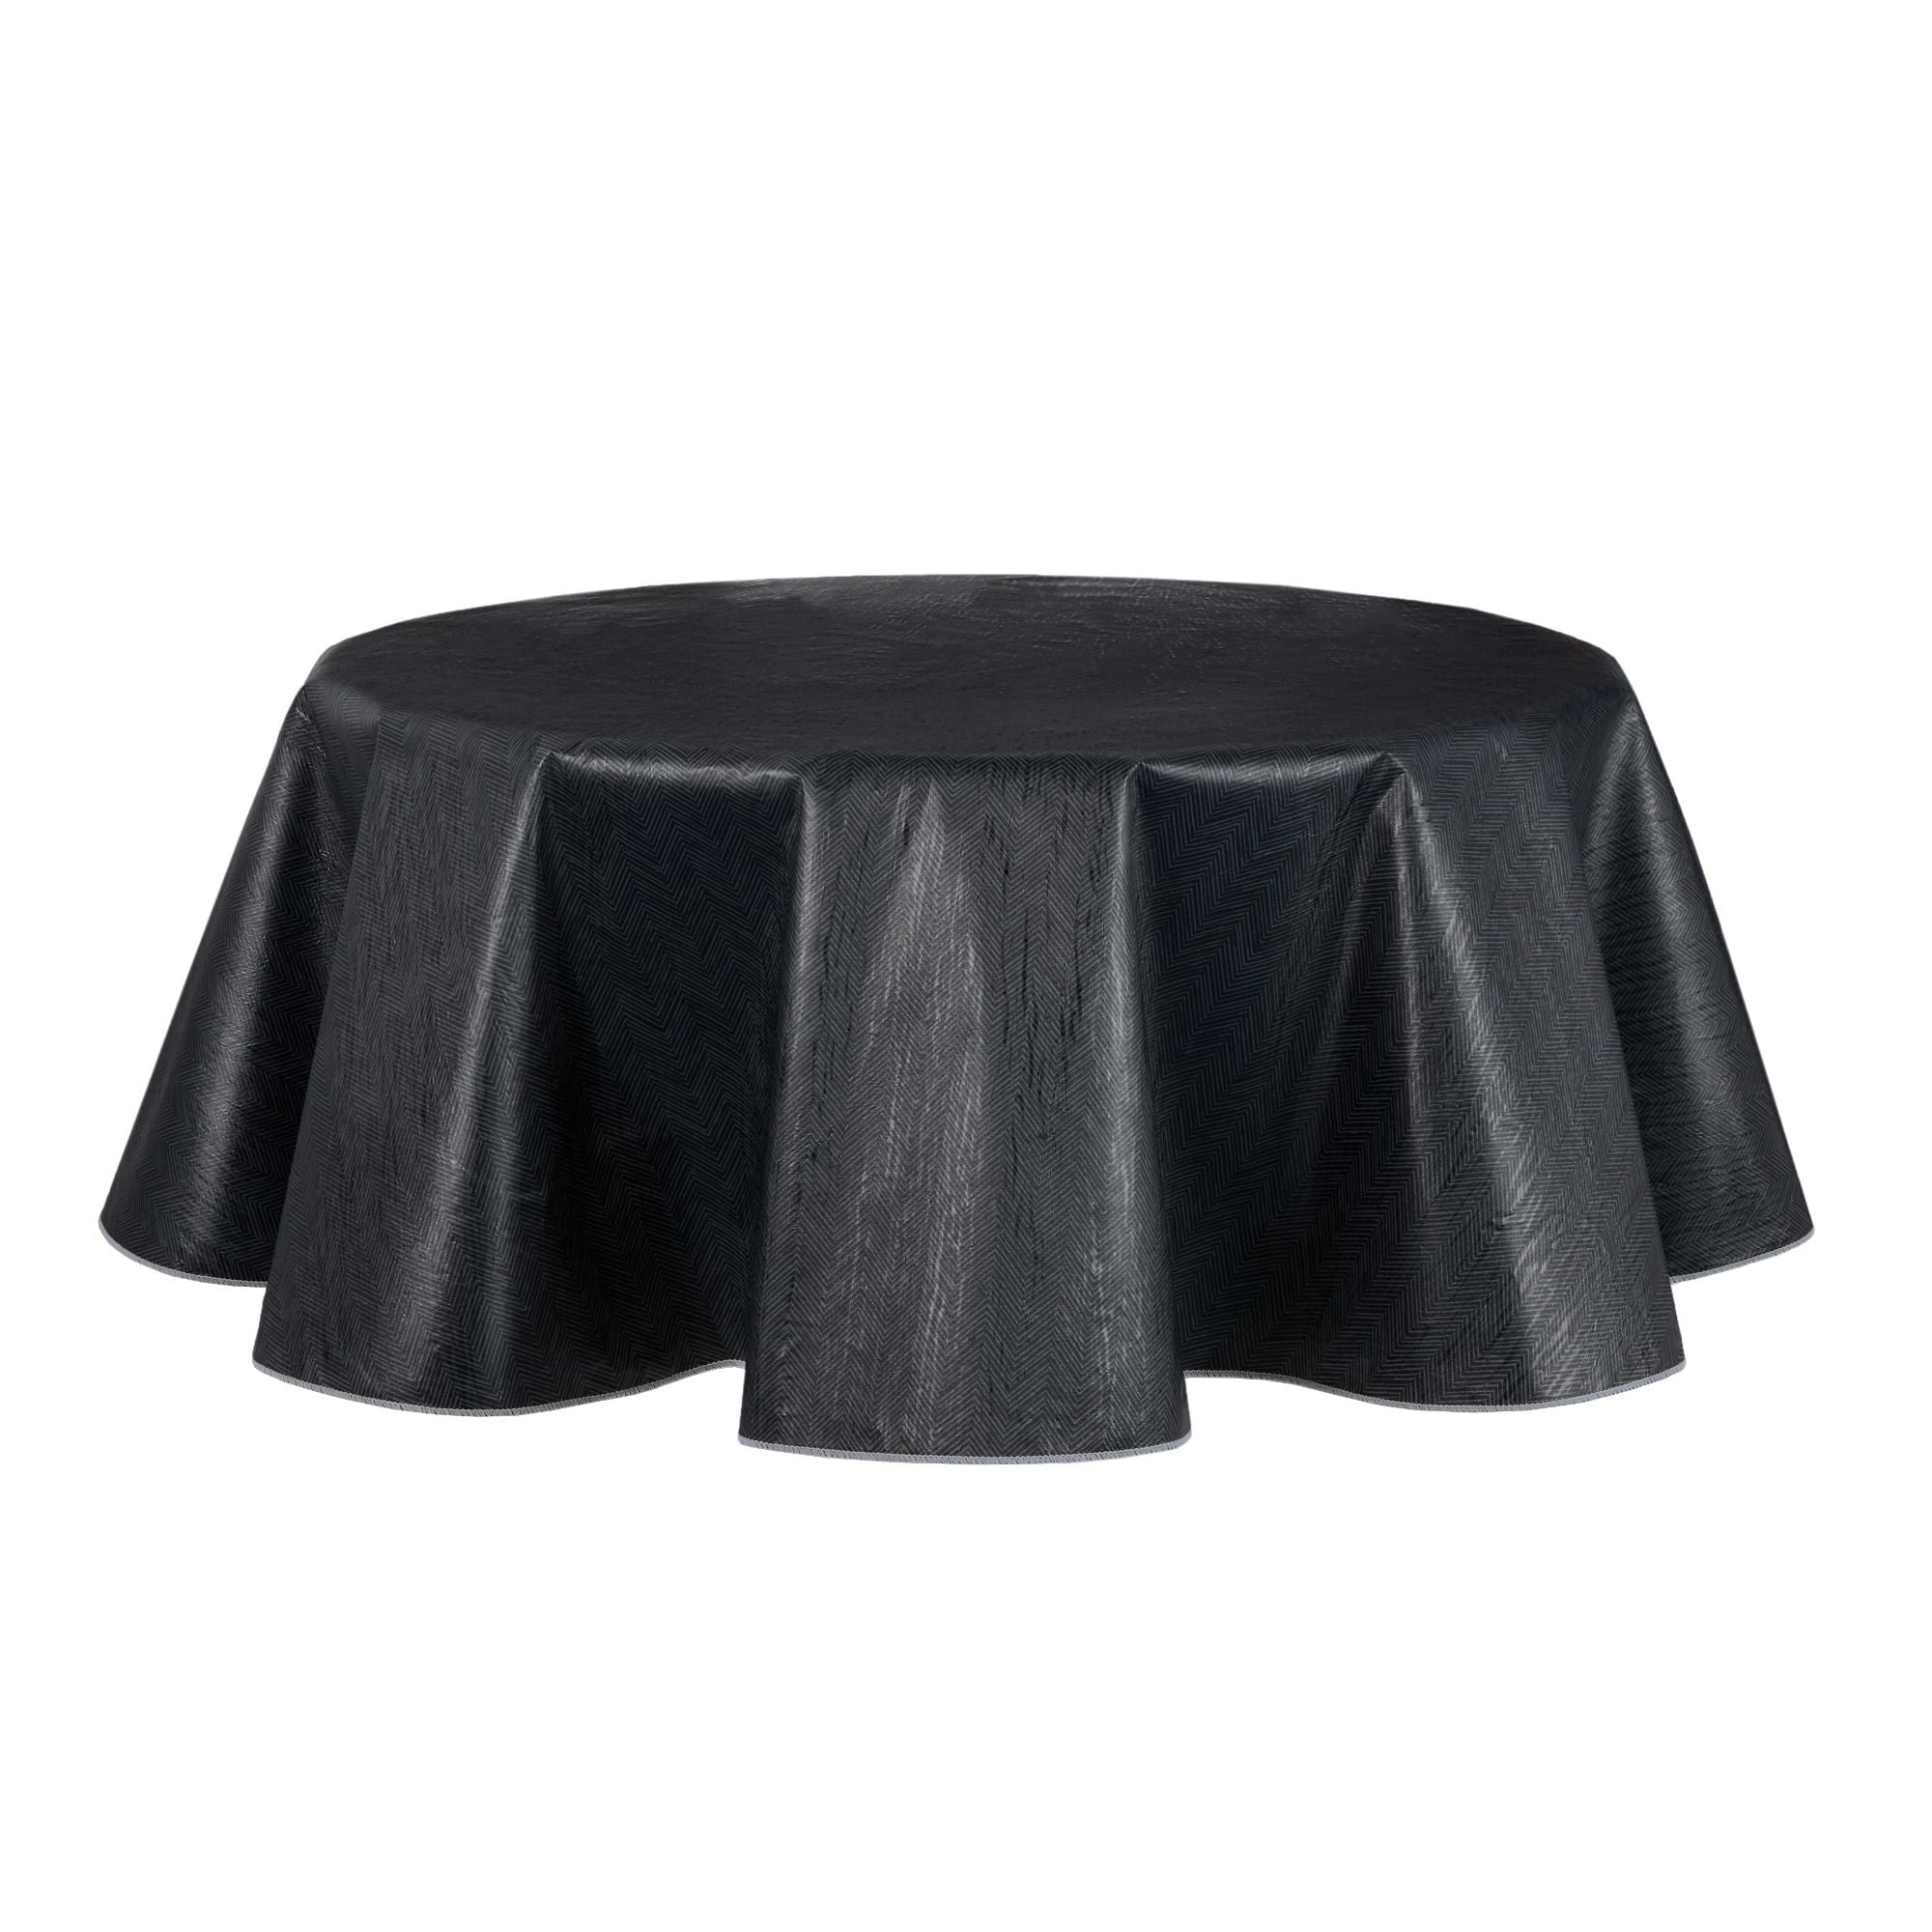 Mainstays Herringbone PEVA Tablecloth, Black, 70" Round, Available in various sizes and colors